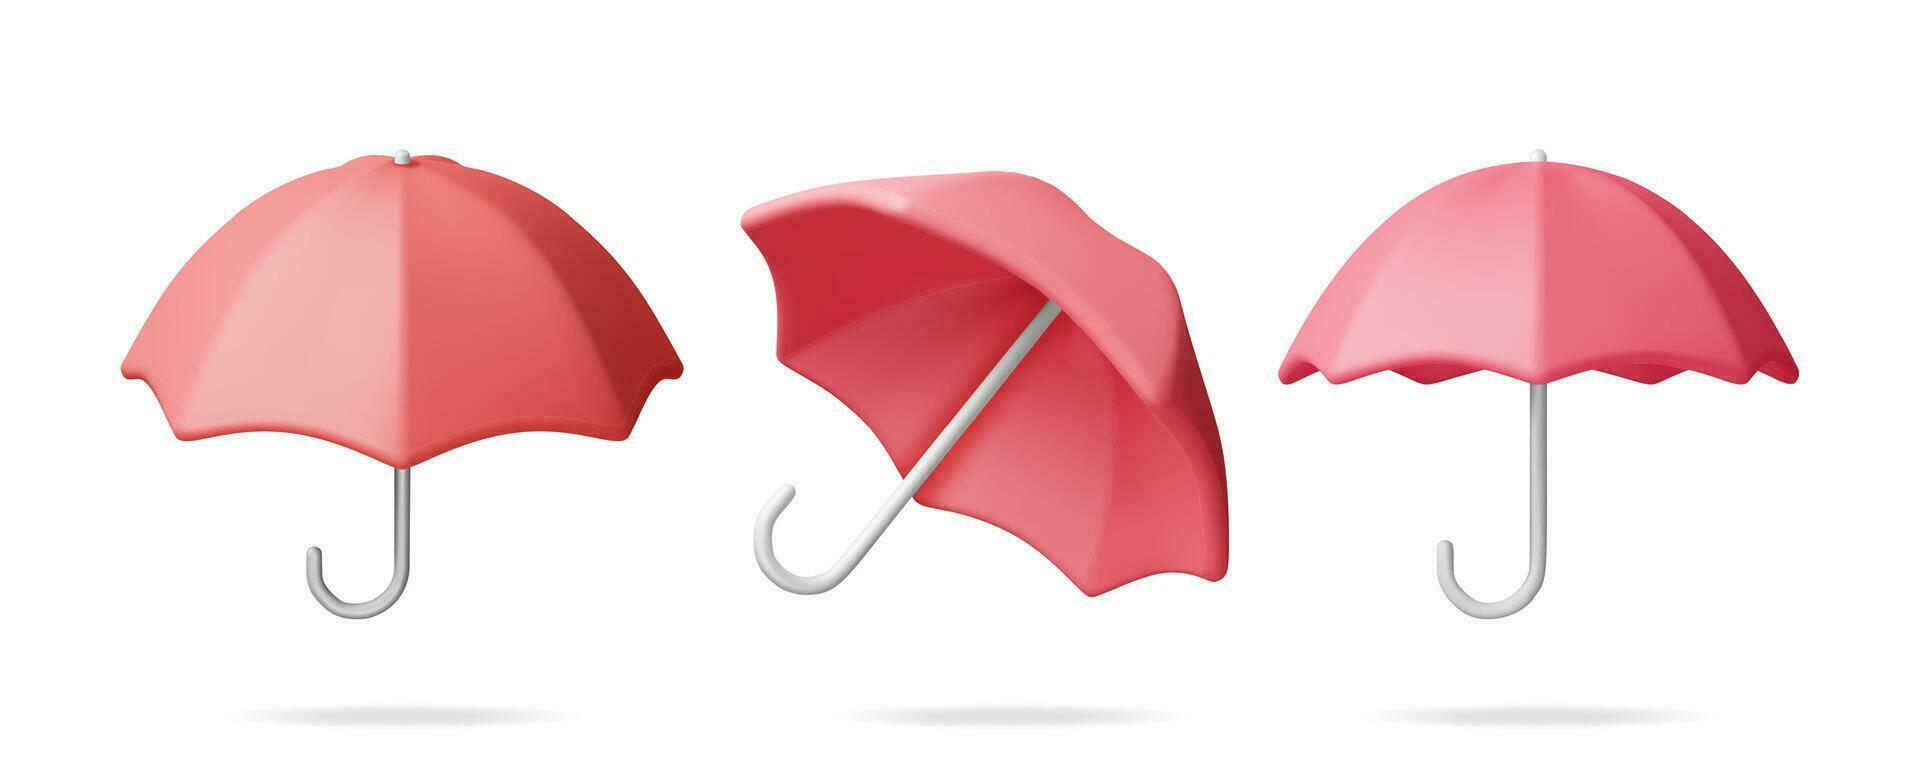 3D Classic Red Umbrella Set Isolated on White. Render Collection of Umbrella Personal Accessory. Protection from Rain, Insurance Symbol. Realistic Vector illustration